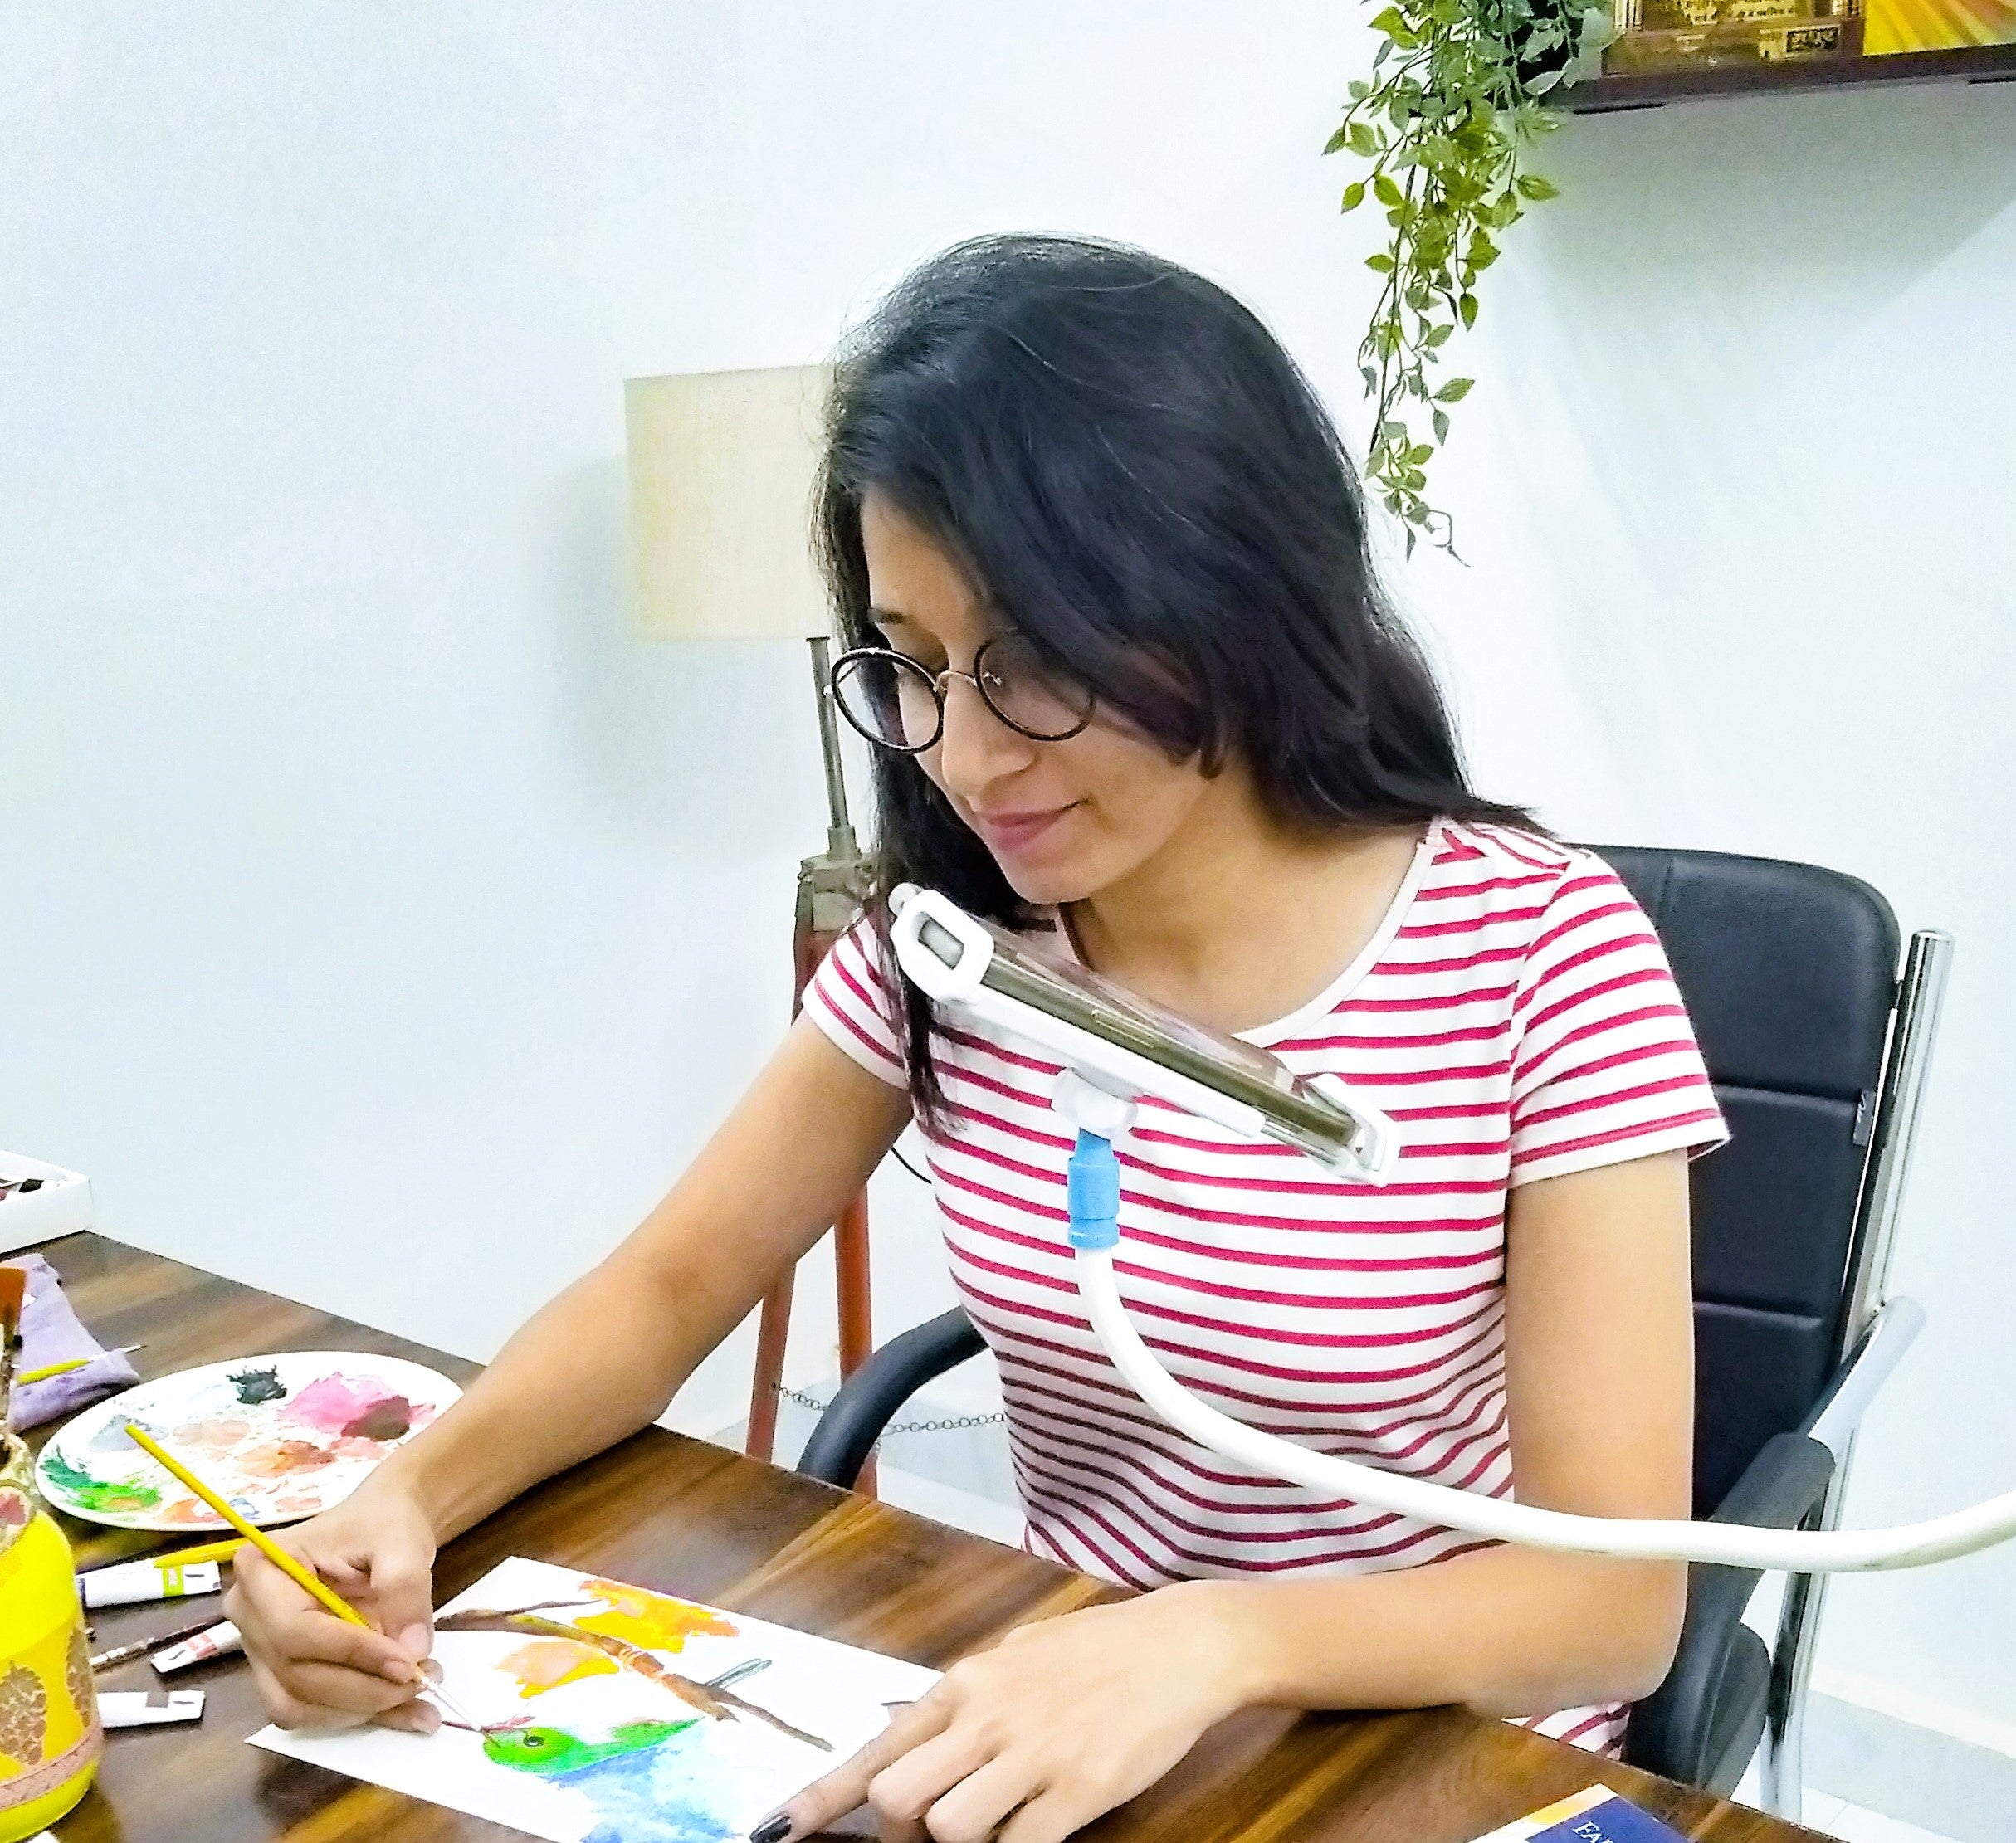 1. Sonam working on an artwork at a wooden desk with her phone recording the process